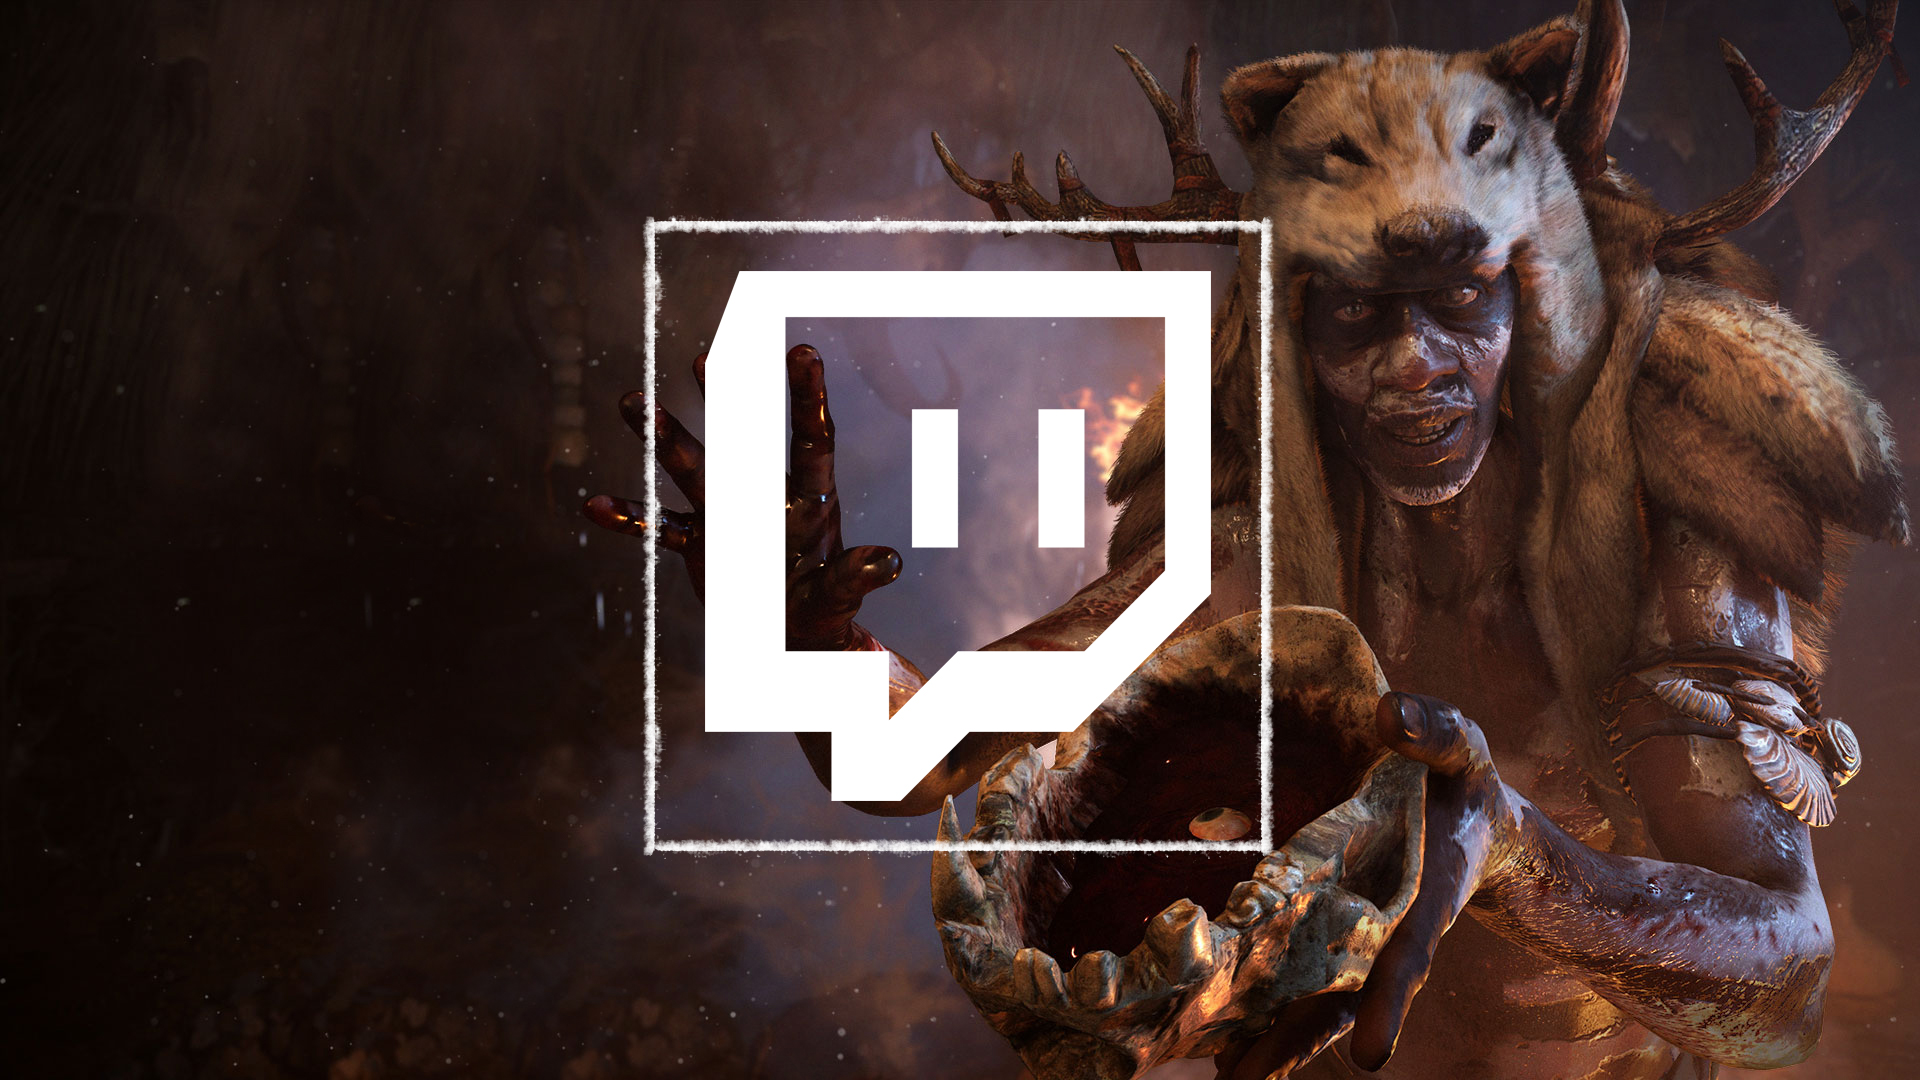 download far cry primal xbox one